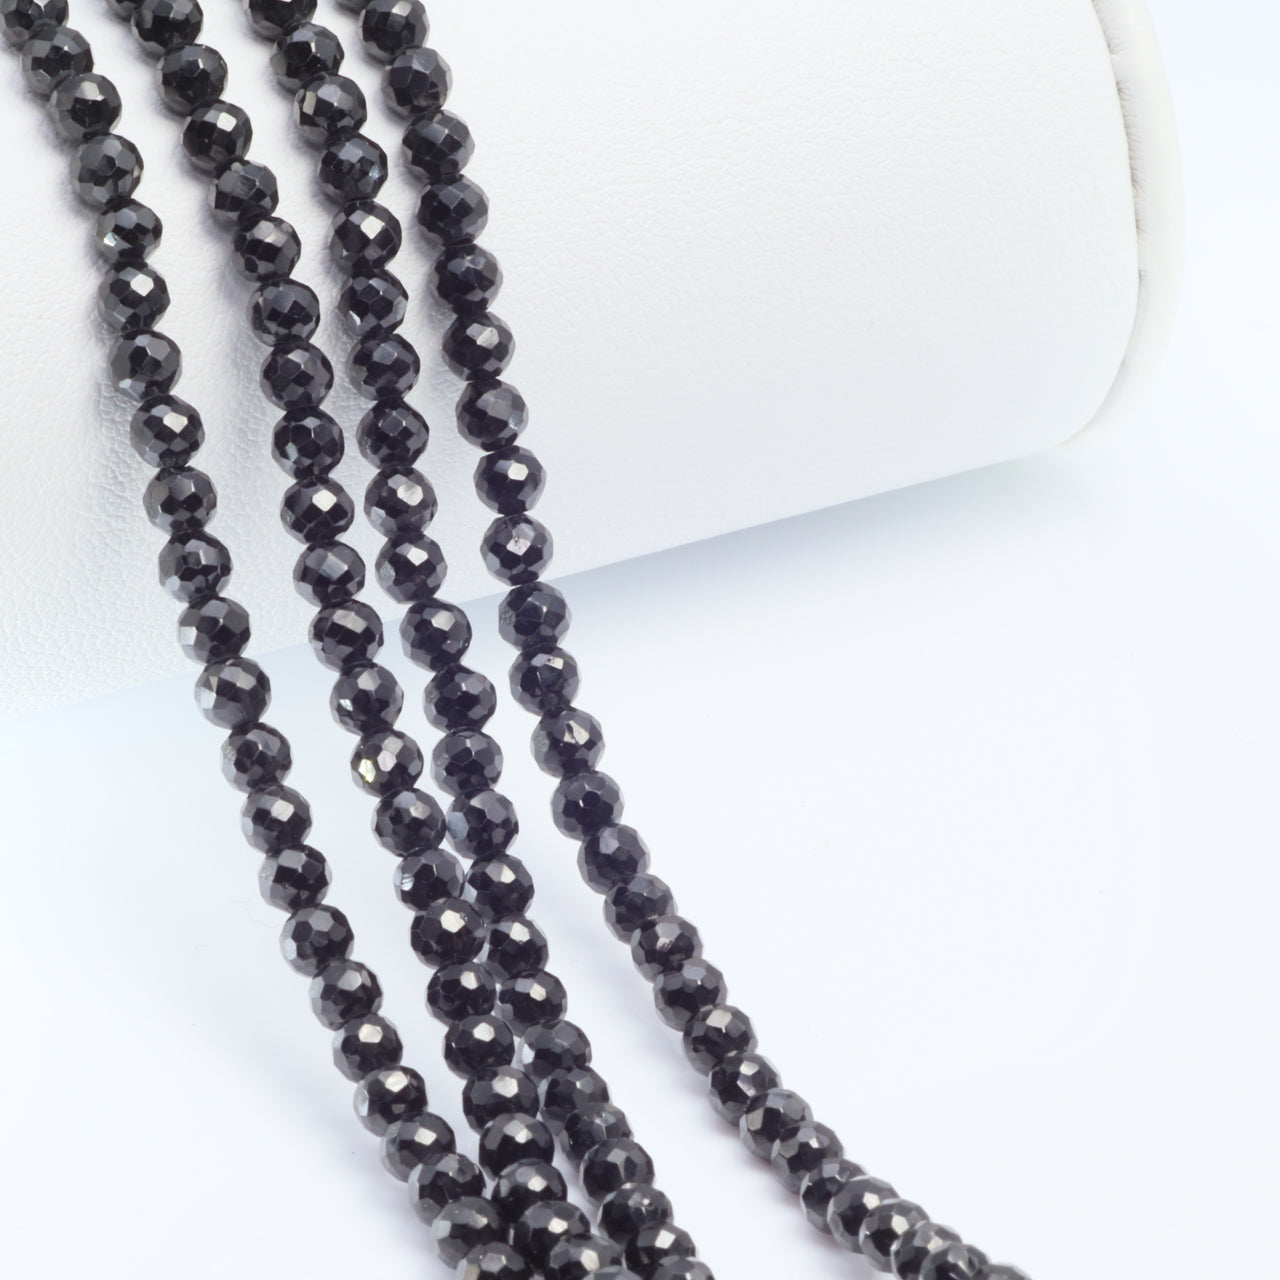 Black Spinel 4mm Faceted Rounds